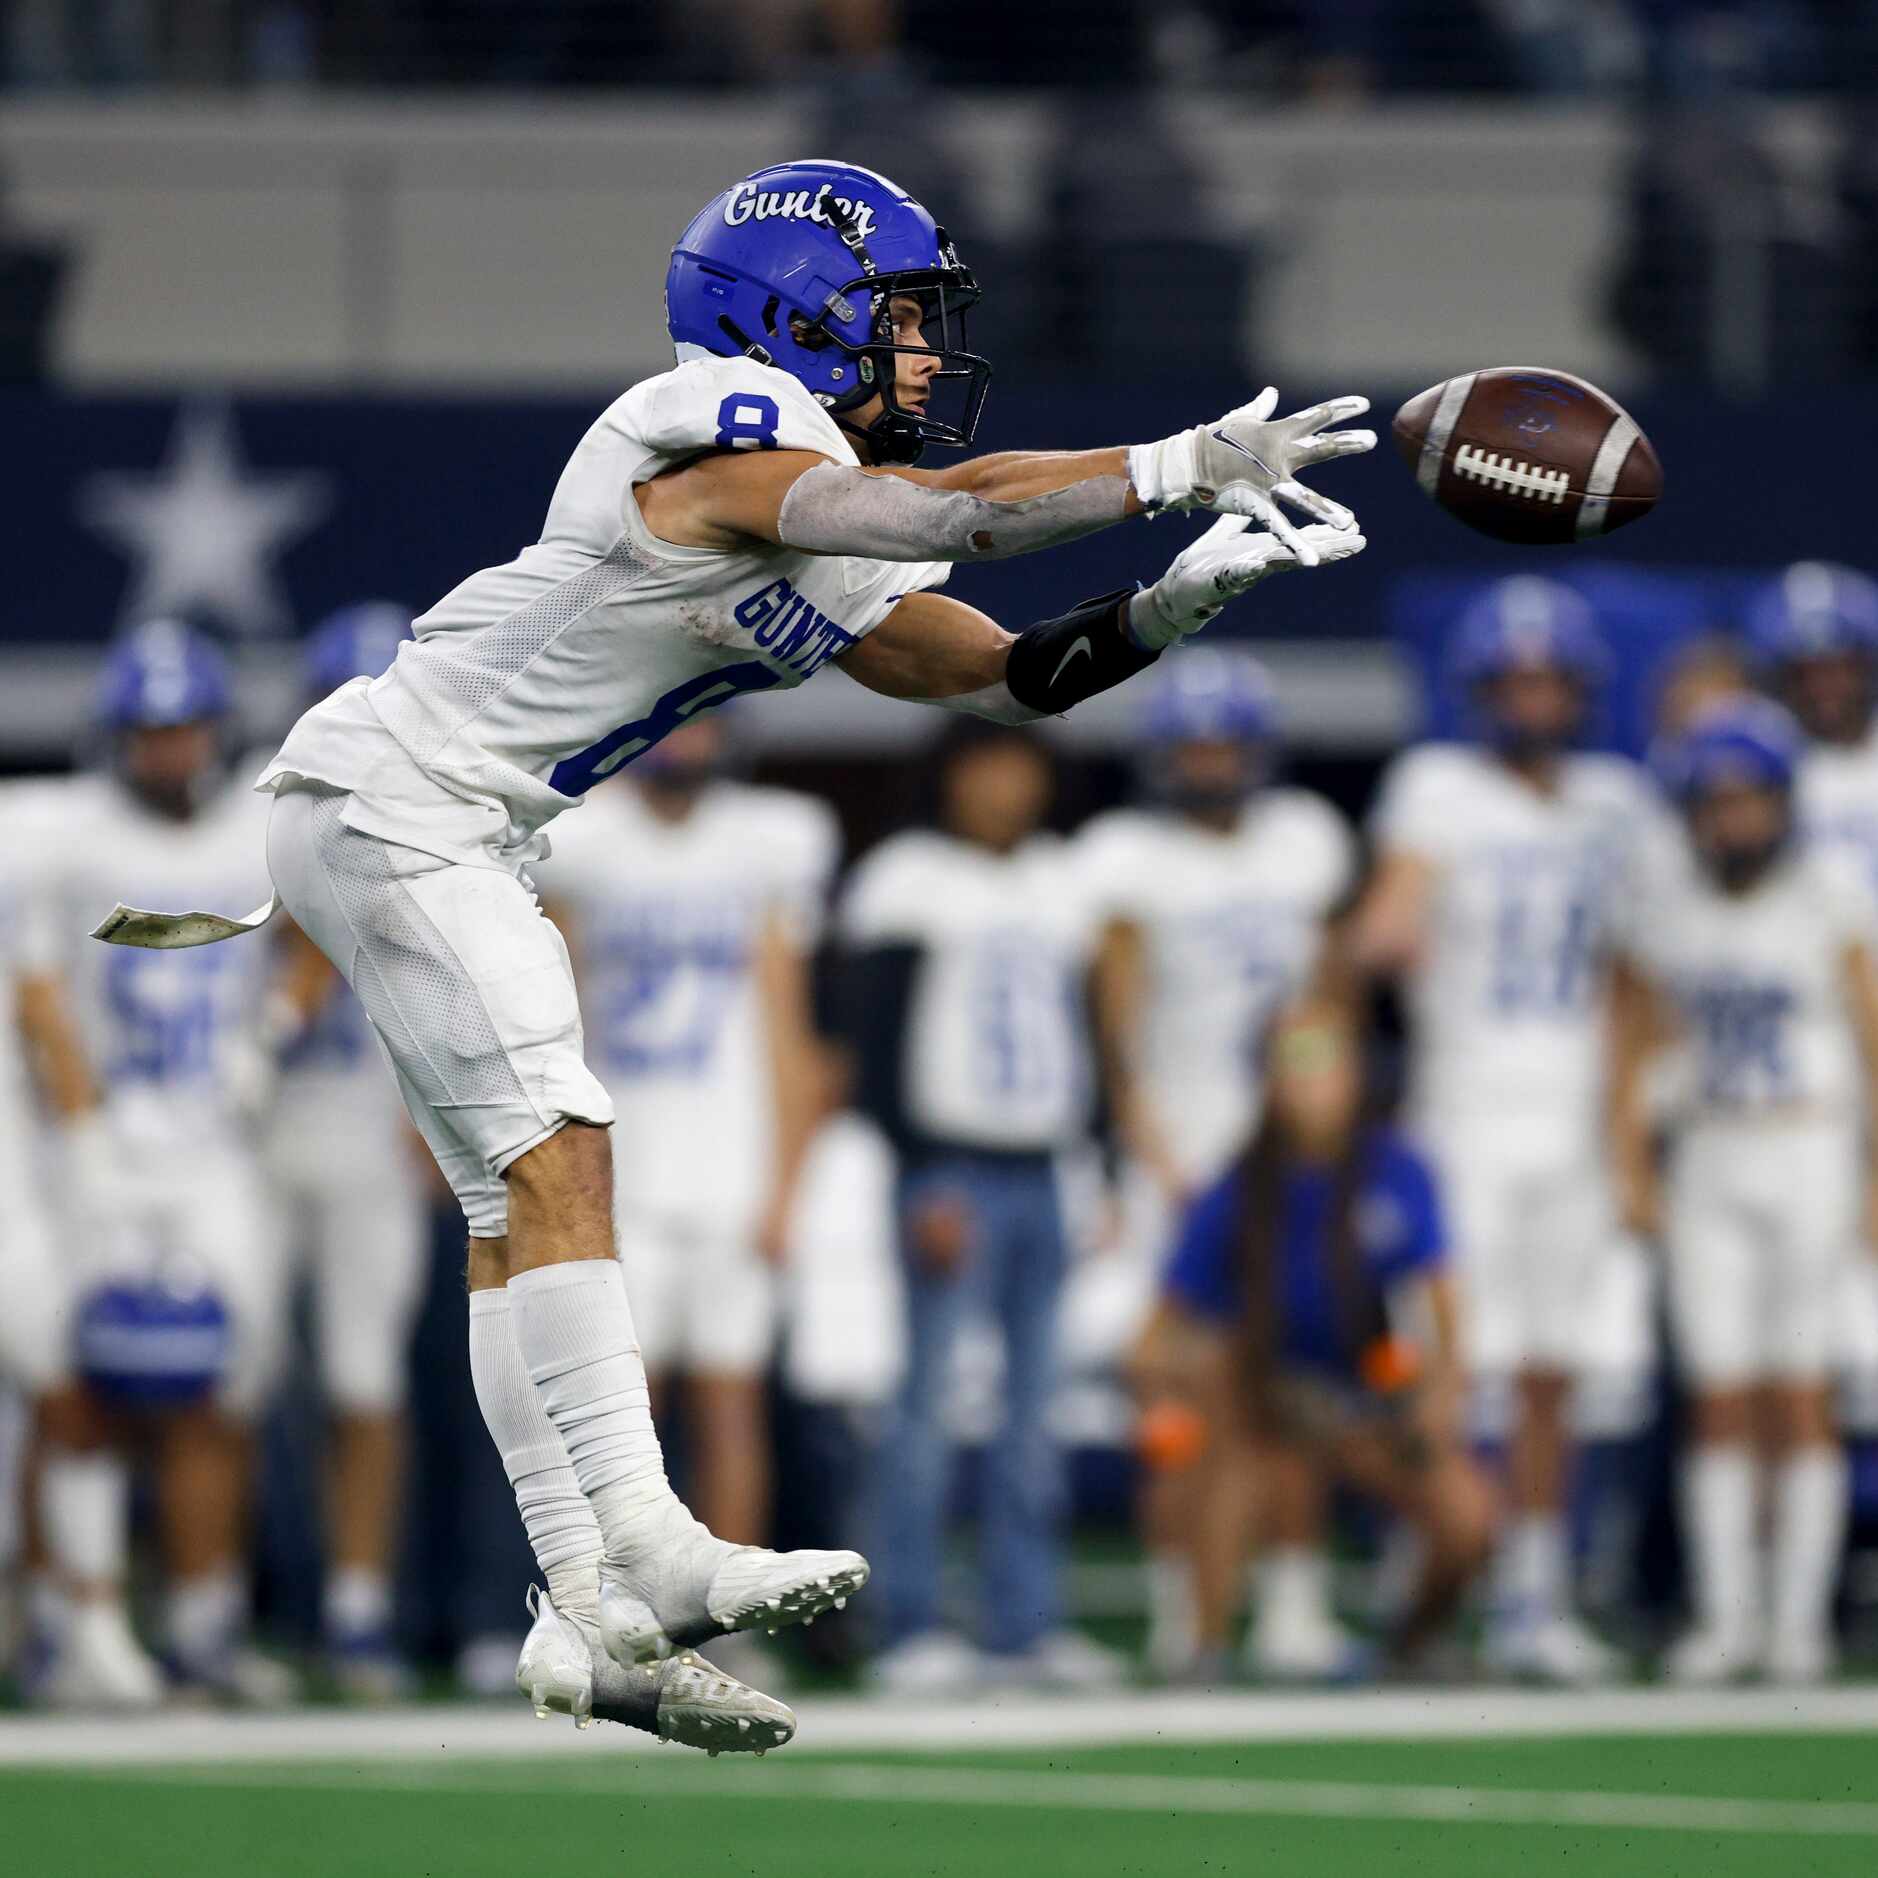 Gunter running back Ethan Sloan (8) jumps back attempting to make a catch during the fourth...